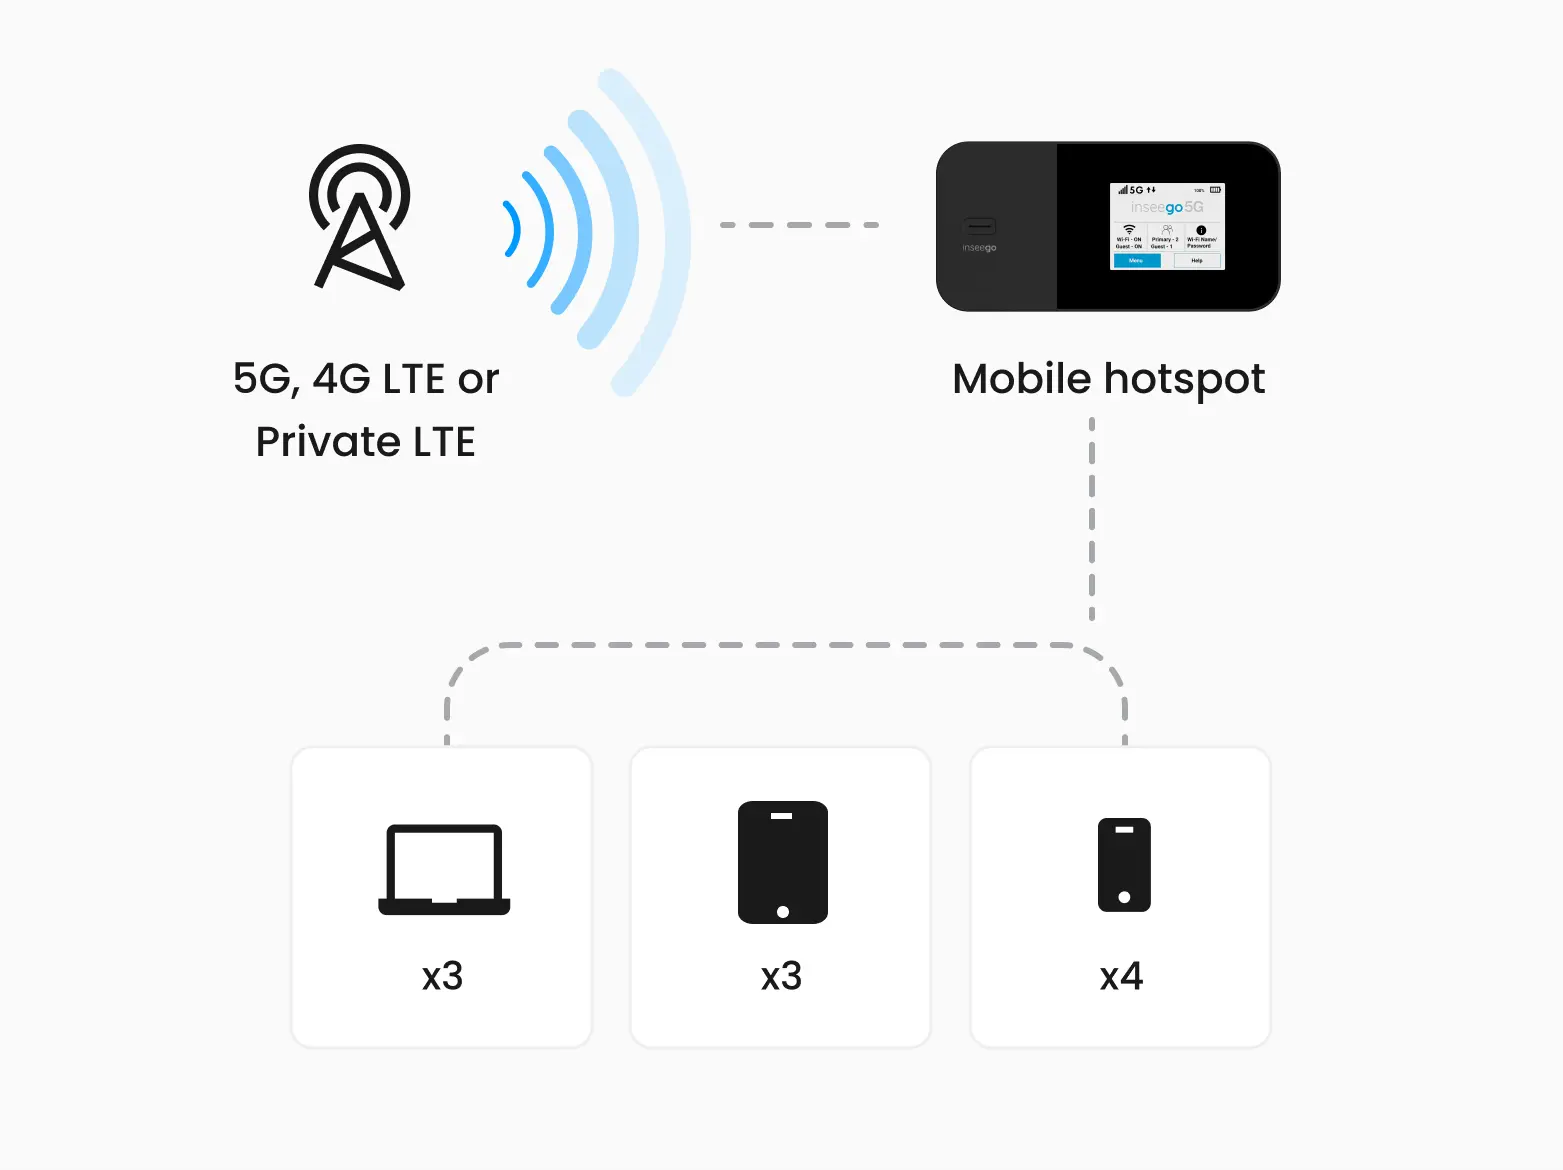 Infographic showing how 5G/4G LTE make it to our mobile hotspot and then connect multiple devices.